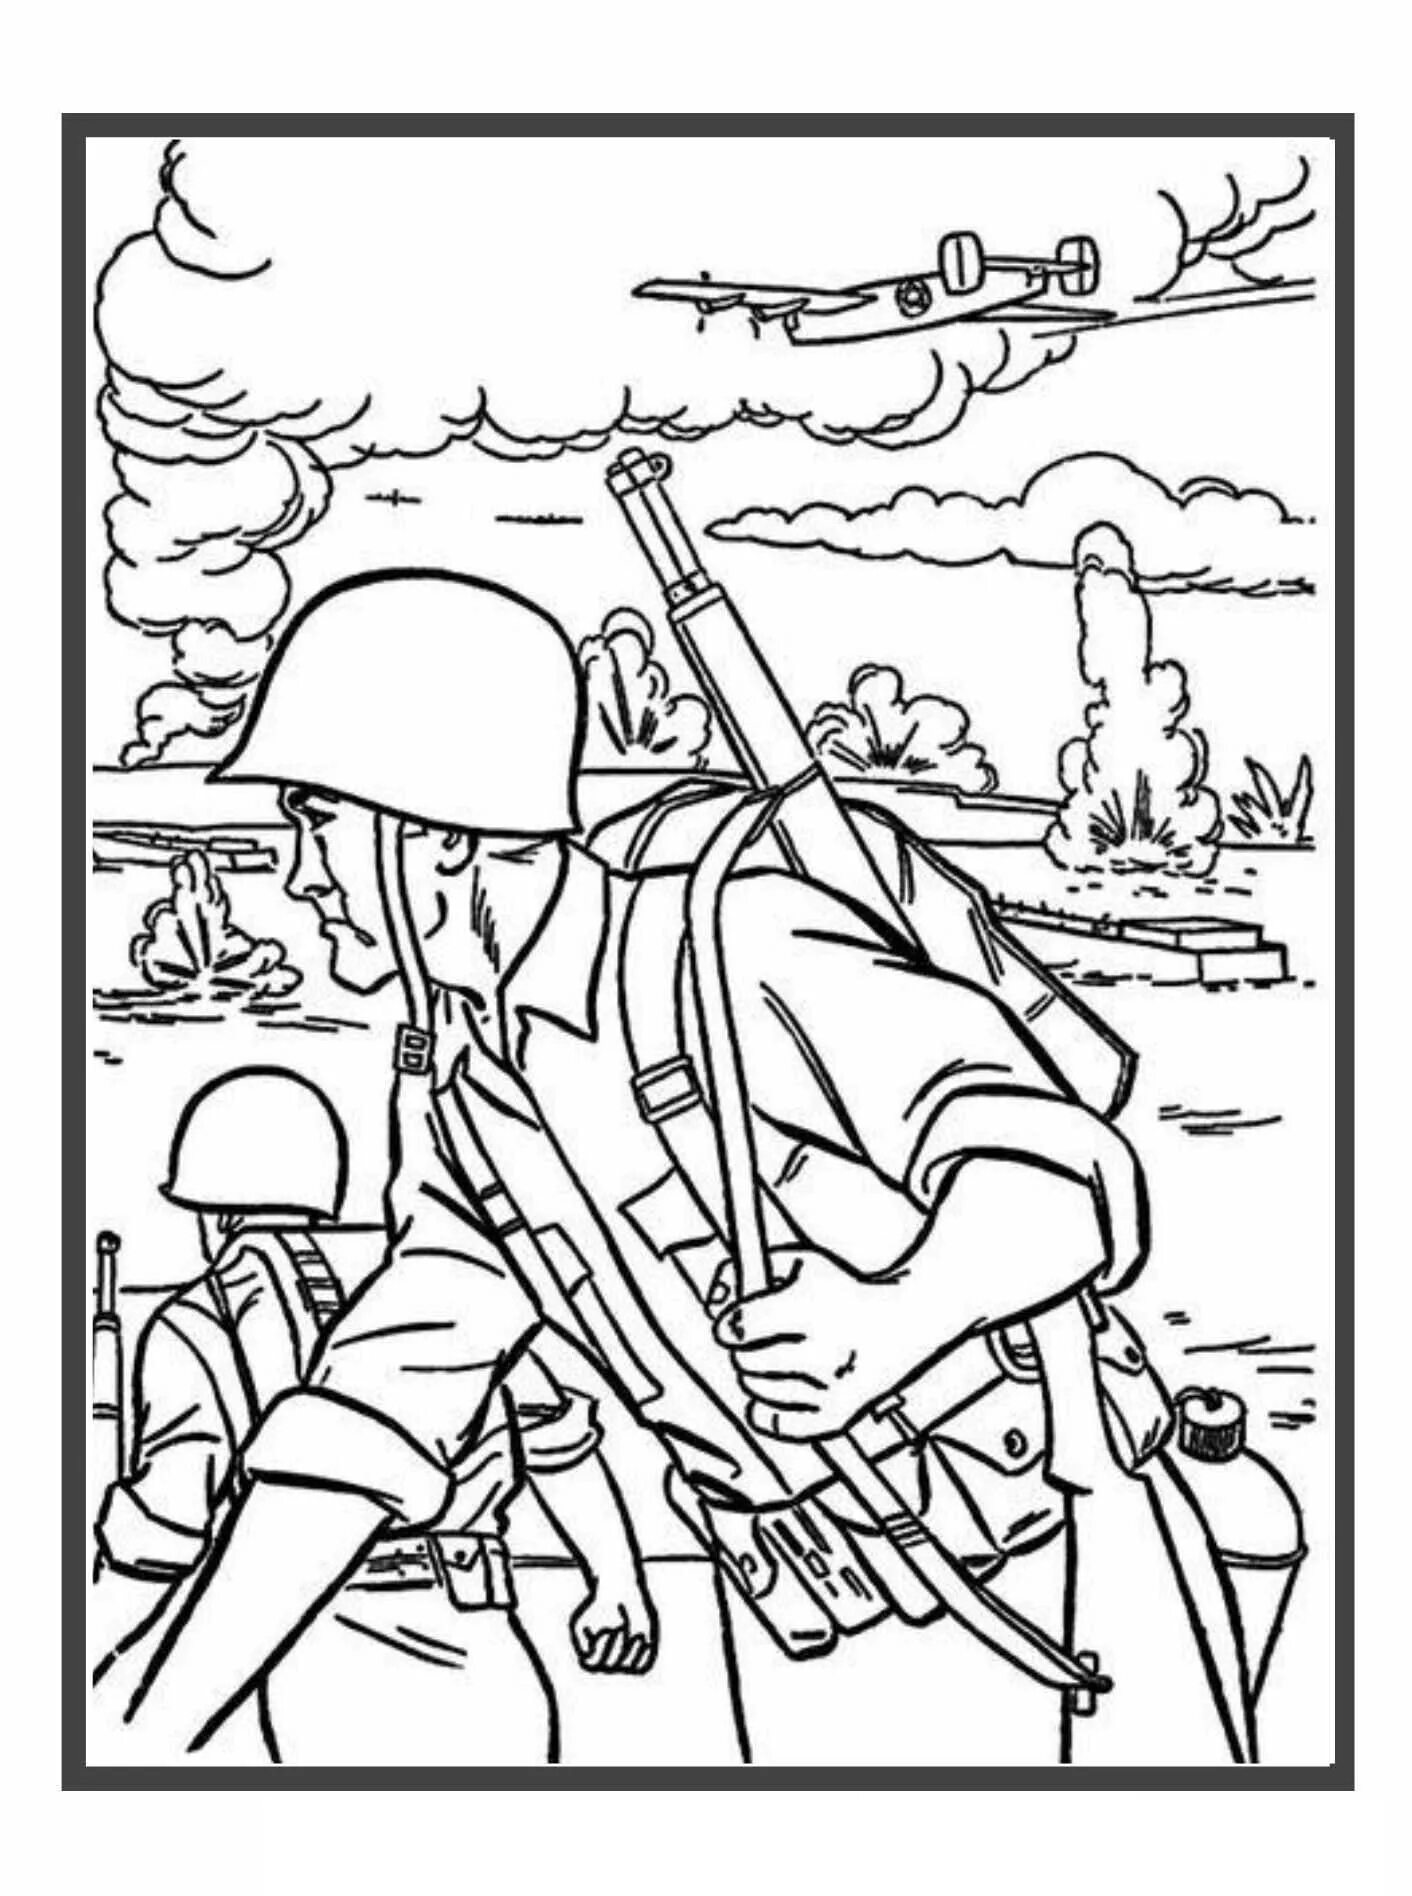 Majestic soldier and children's coloring